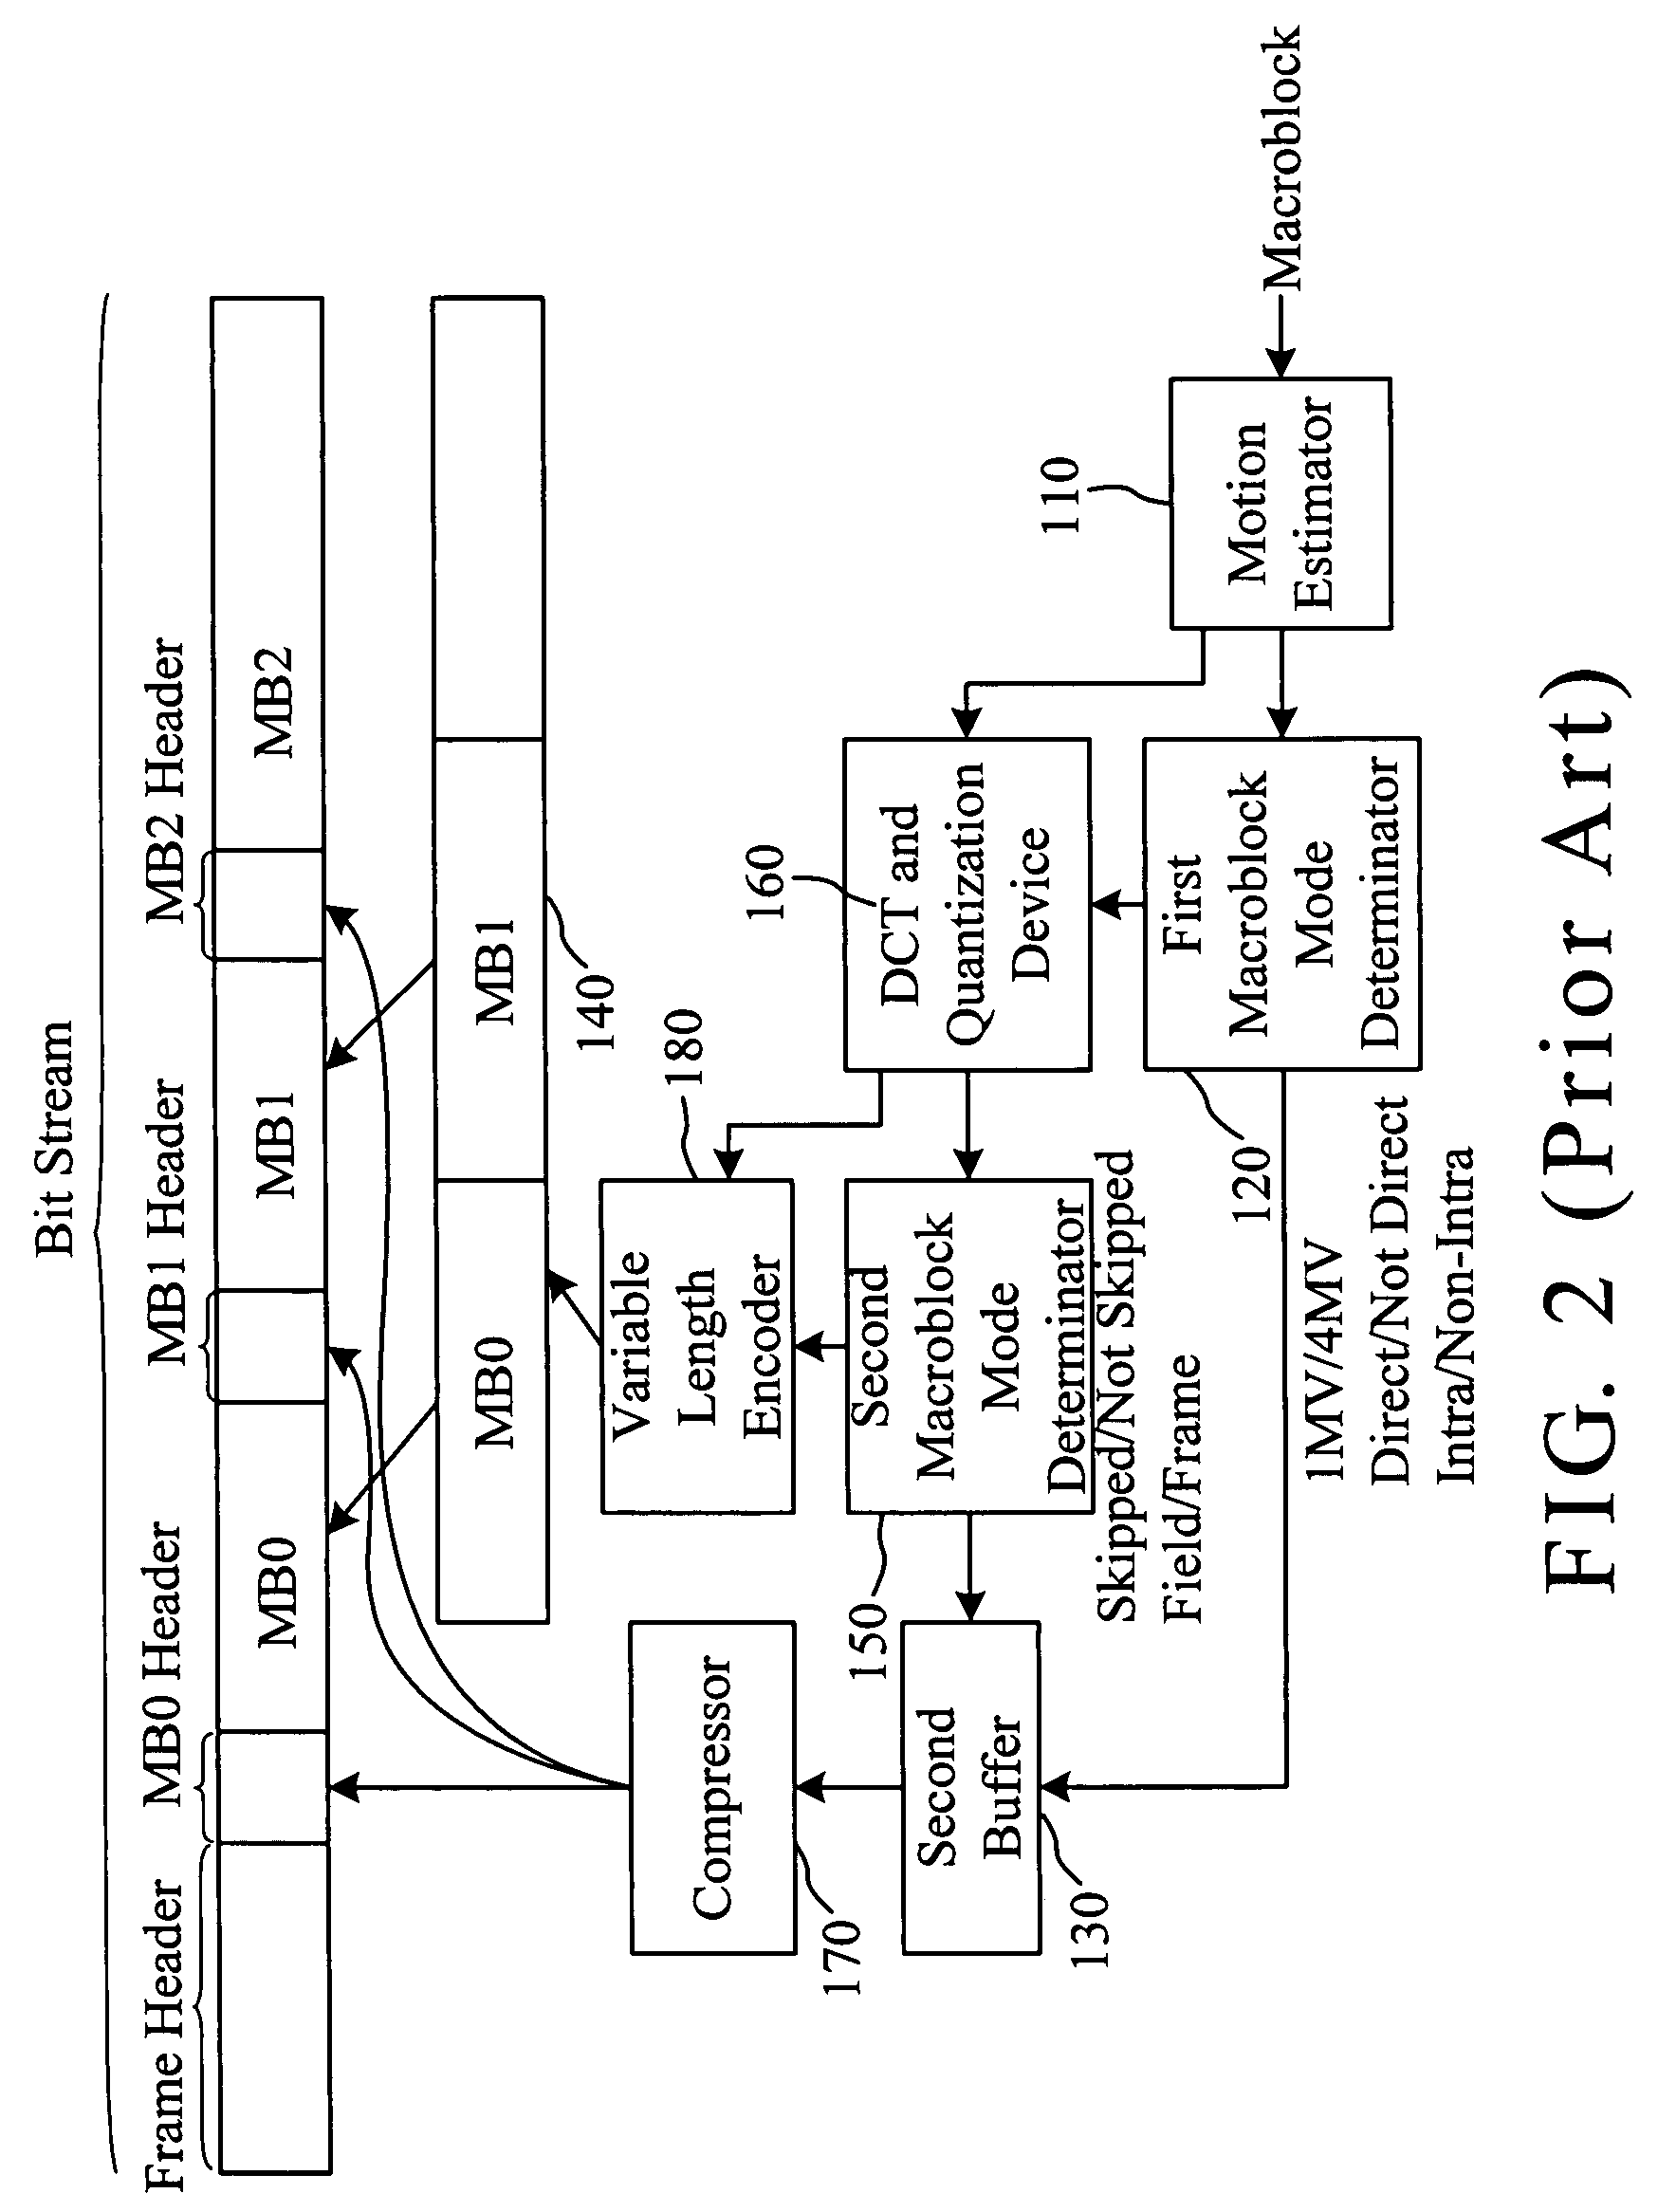 Coding method and system with an adaptive bitplane coding mode